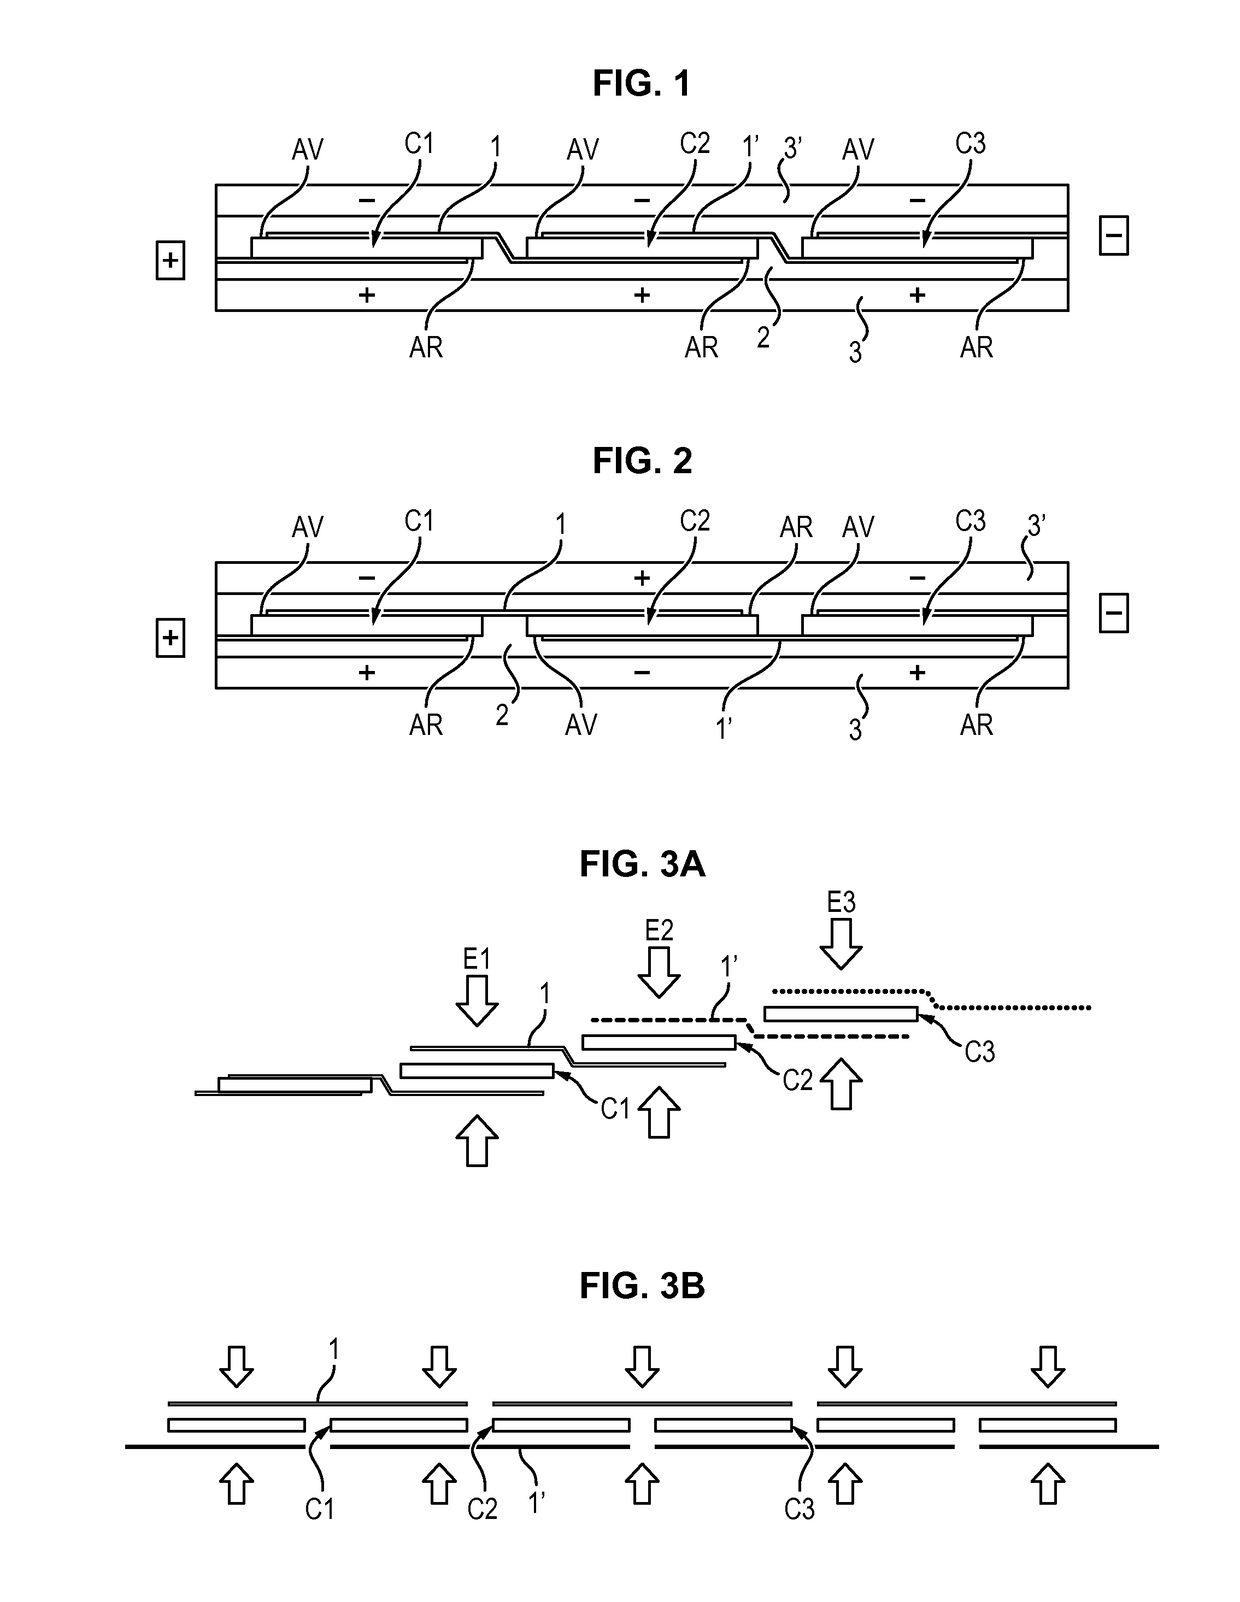 Photovoltaic module comprising a plurality of bifacial cells and method for producing such a module